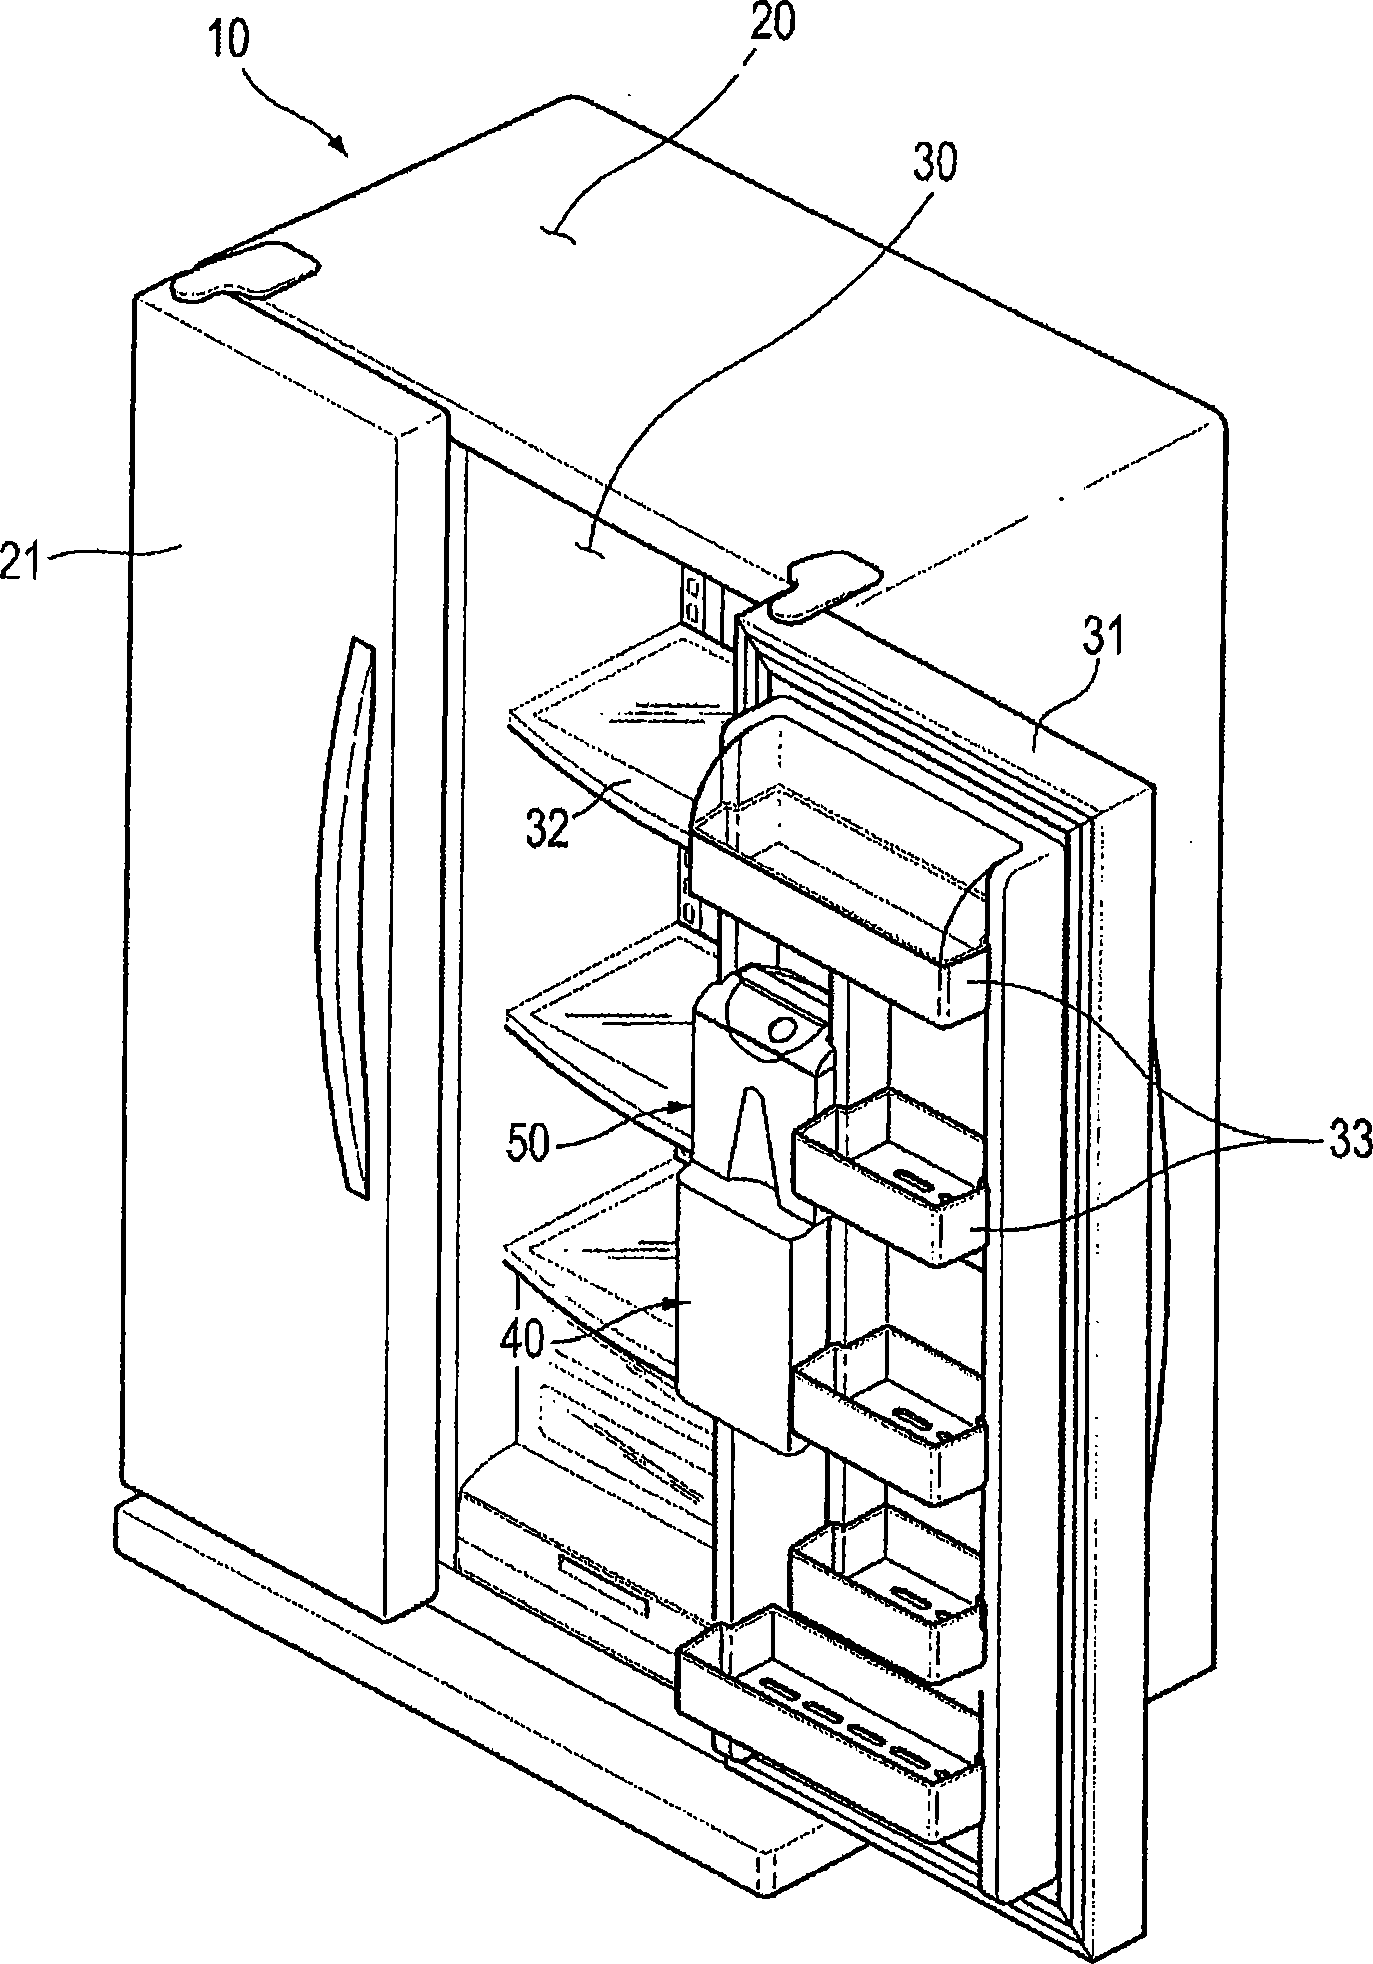 Water tank for dispenser and refrigerator having the same